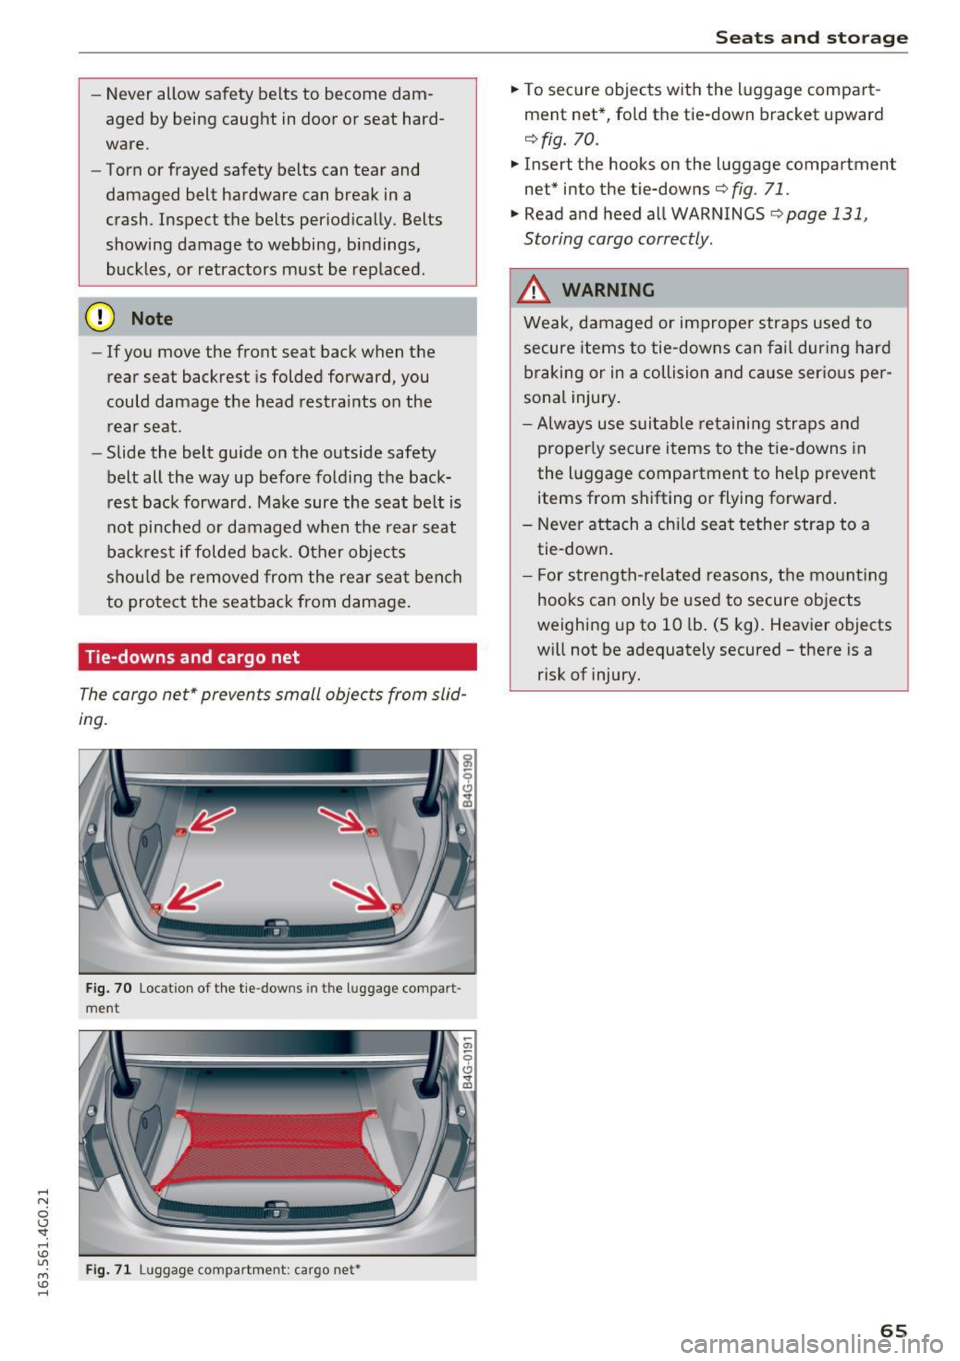 AUDI A6 2016  Owners Manual ..... N 
0 CJ <I: ..... I.Cl U"I 
M I.Cl ...... 
-Never  allow  safety  belts  to  become  dam­
aged  by being  caught  in door  or  seat  hard­
ware. 
- Torn  or frayed  safety  belts  can  tear  